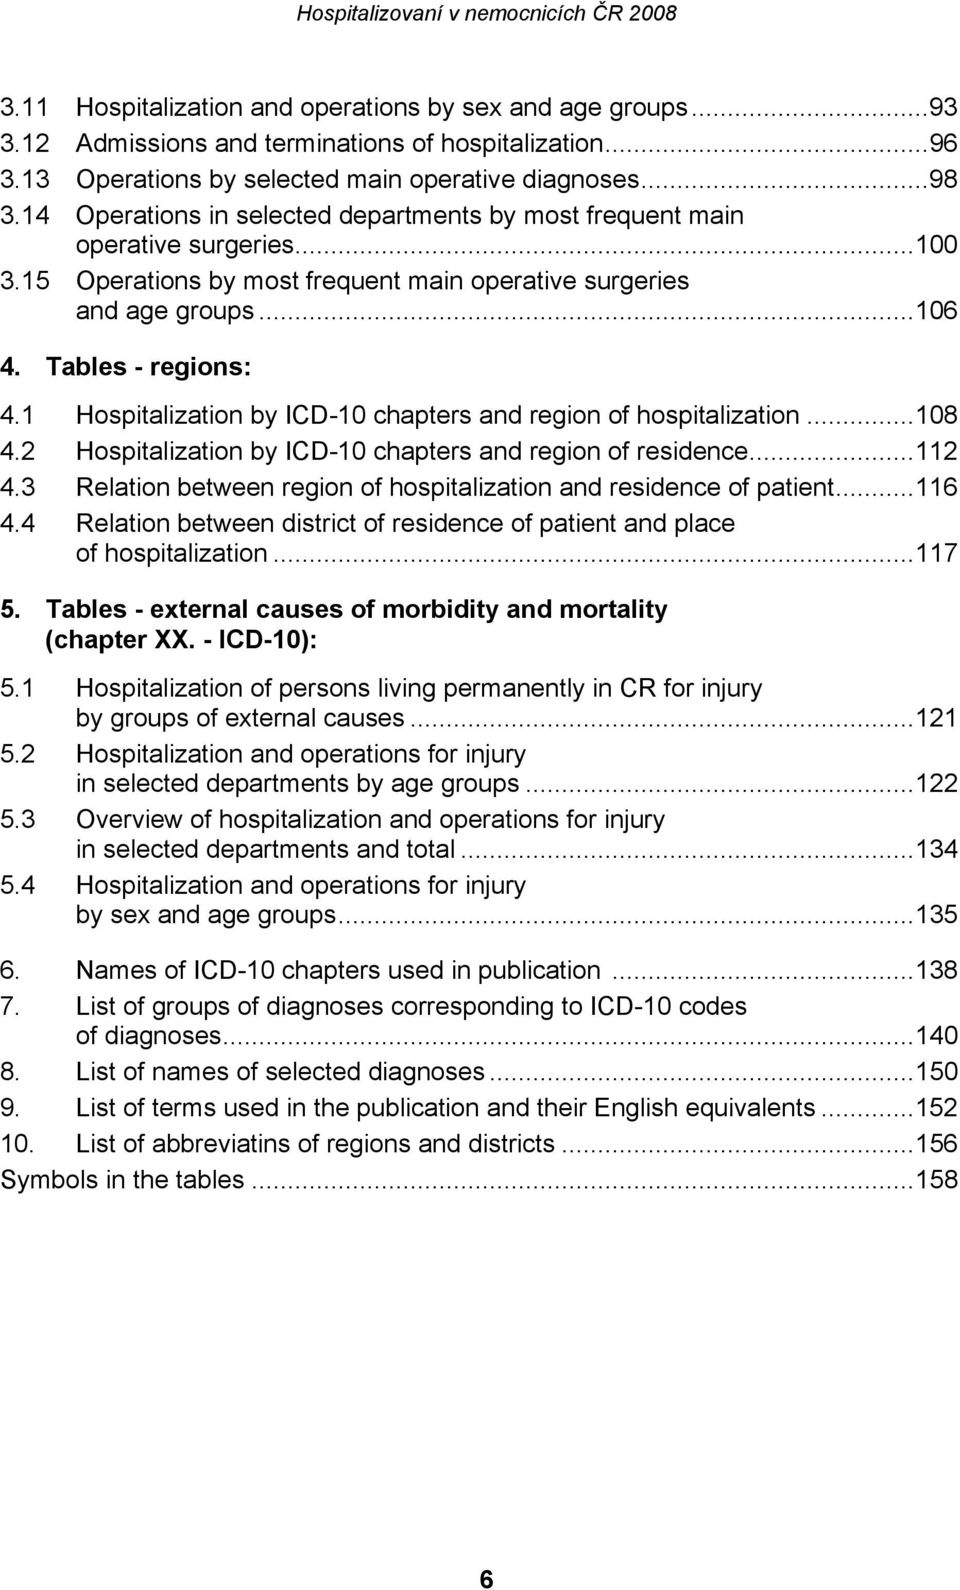 1 Hospitalization by ICD-10 chapters and region of hospitalization...108 4.2 Hospitalization by ICD-10 chapters and region of residence...112 4.